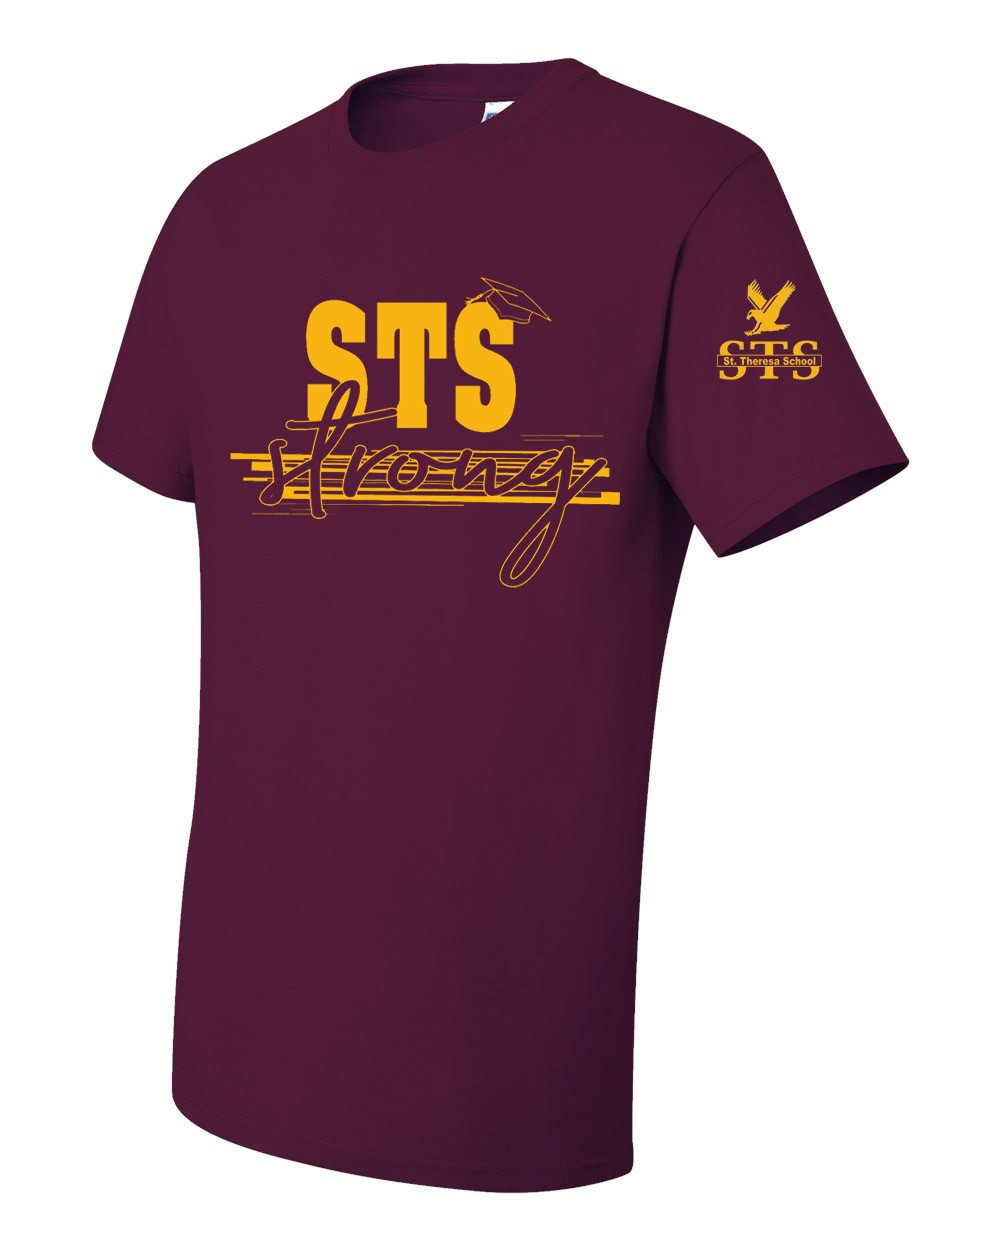 STS Staff S/S Strong Spirit T-Shirt w/ Gold Logo - Please Allow 2-3 Weeks for Delivery